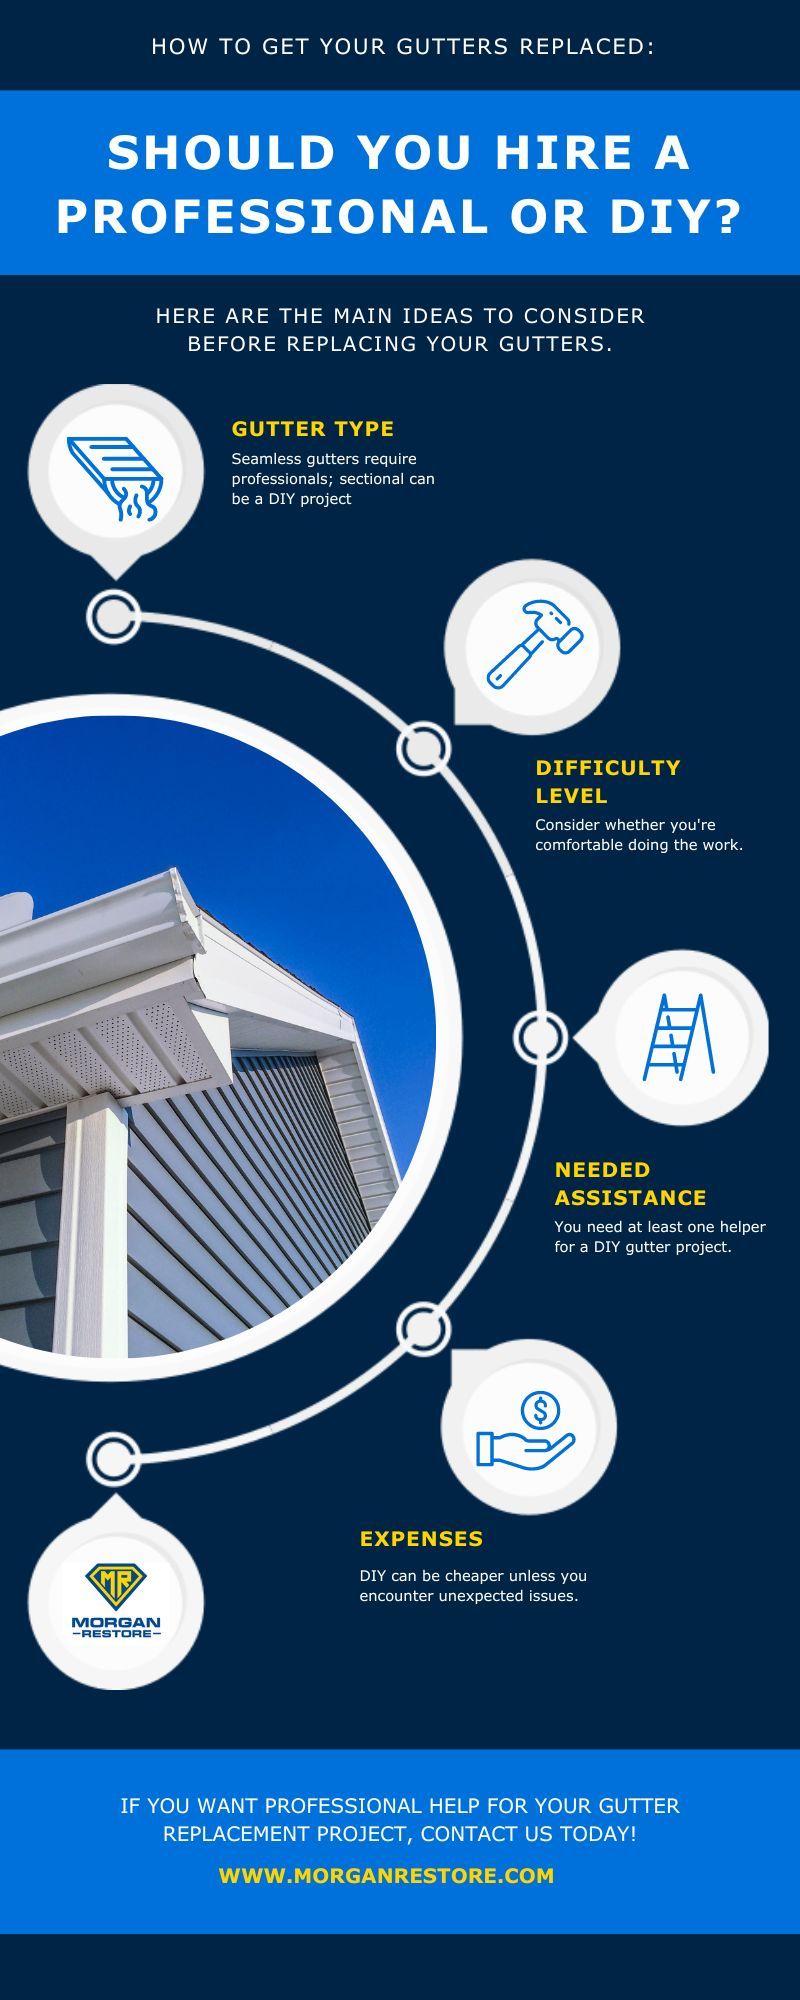 M37430 - Infographic - How To Get Your Gutters Replaced- Should You Hire a Professional or DIY.jpg